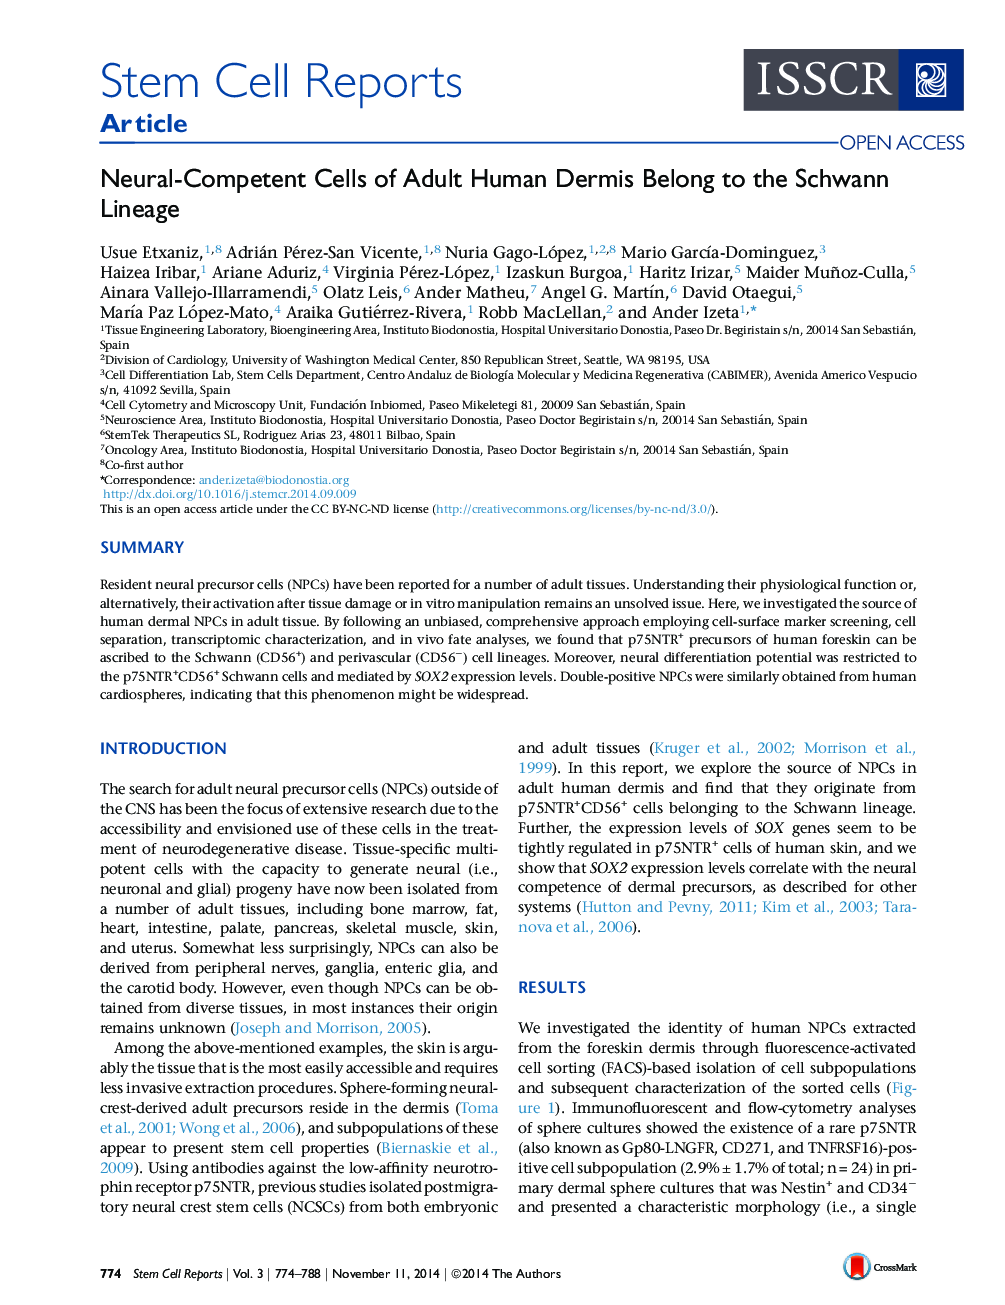 Neural-Competent Cells of Adult Human Dermis Belong to the Schwann Lineage 